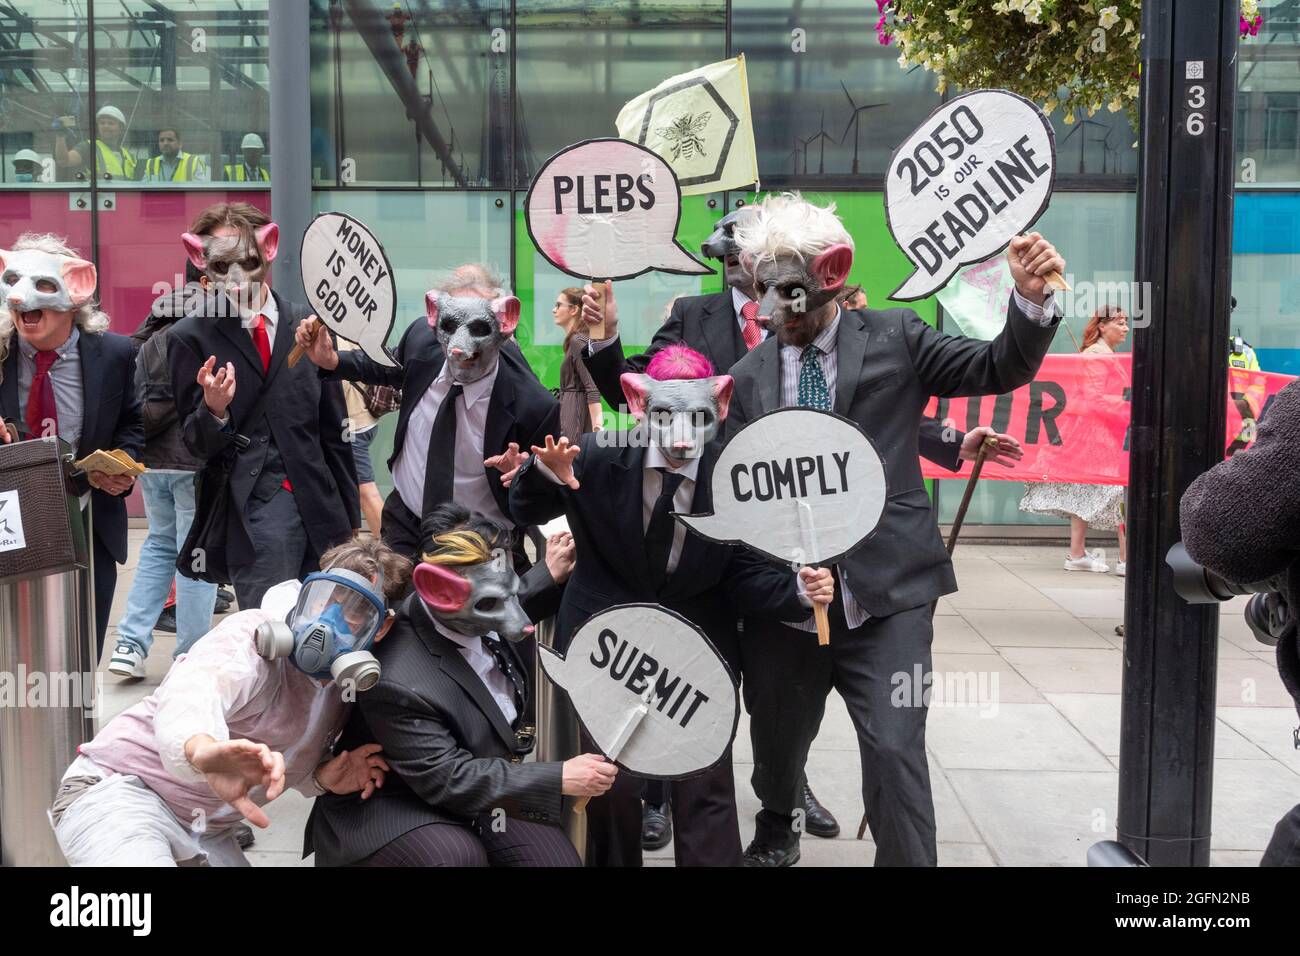 Protesters in a mask outside the Department for Business Energy and Industrial Strategy during Extinction Rebellion's Impossible Rebellion protest continues march to the Department for Business Energy and Industrial Strategy under the banner of Stop The Harm protesting against climate change, global warming, and plans to target the root cause of the climate and ecological crisis and to demand the government divest from fossil fuel companies. (Photo by Dave Rushen / SOPA Images/Sipa USA) Stock Photo